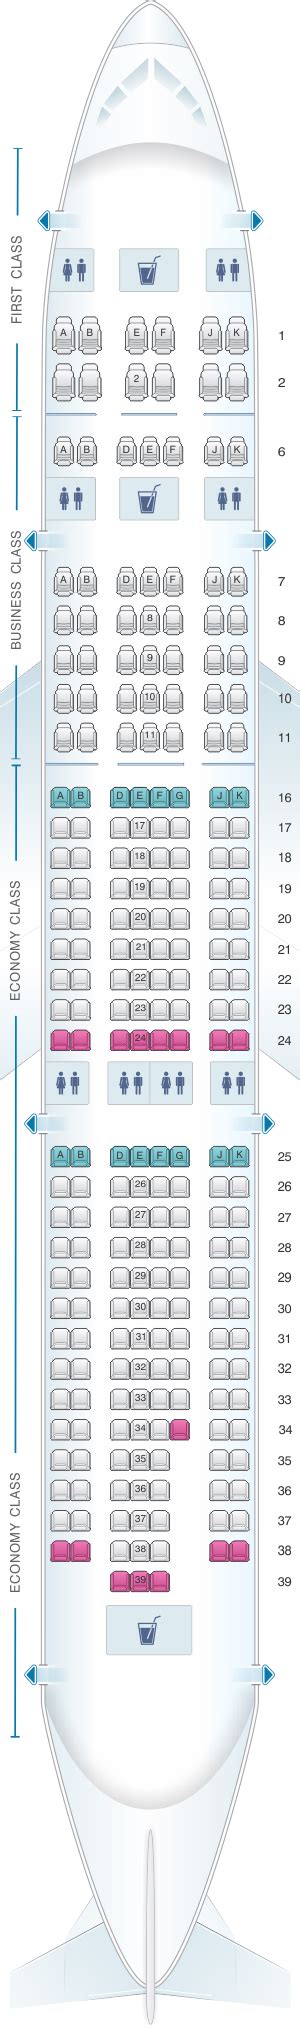 A380 Emirates Seat Map